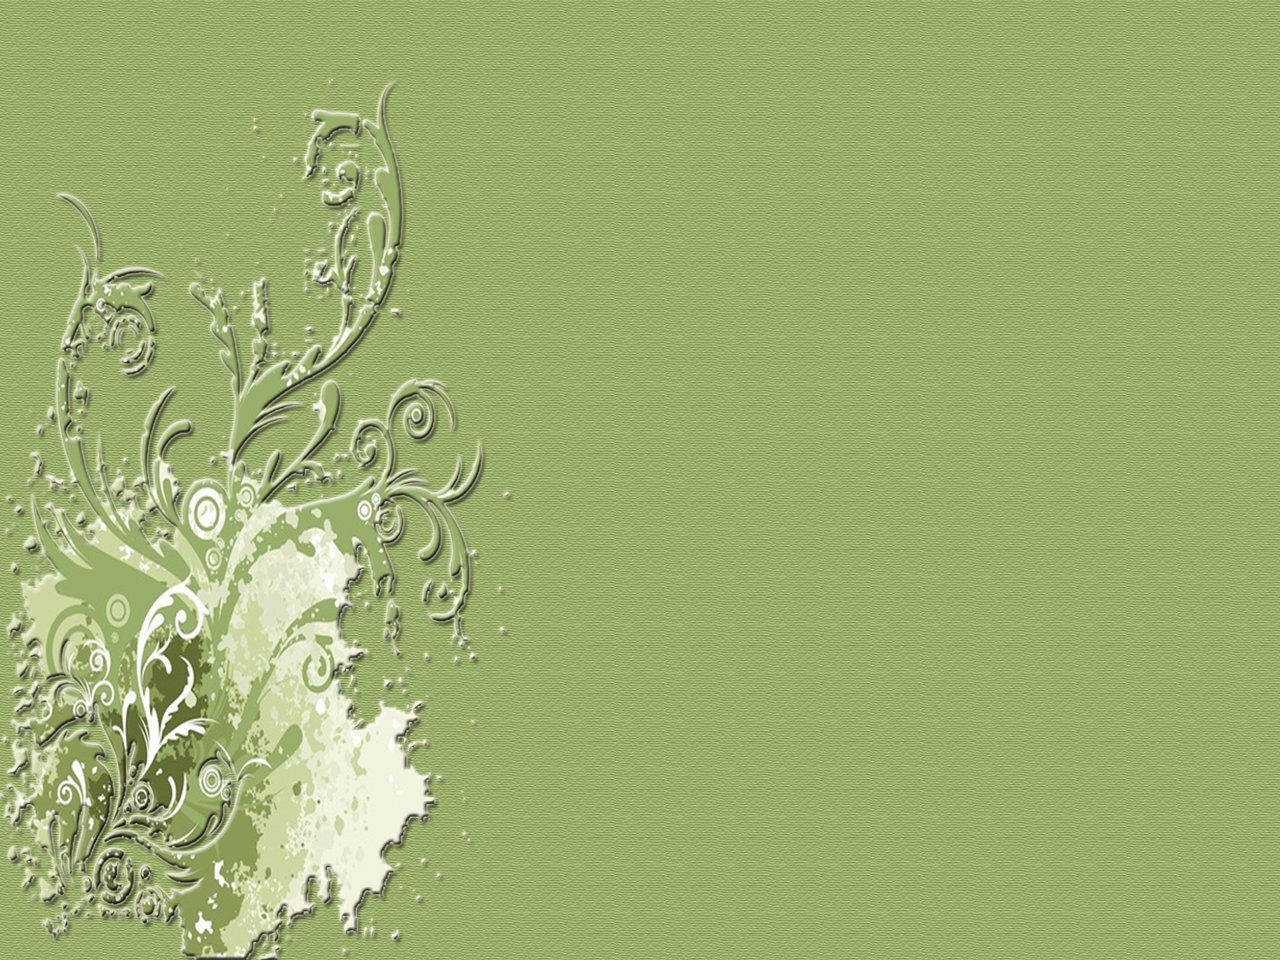 A green background with a white floral design on the left - Sage green